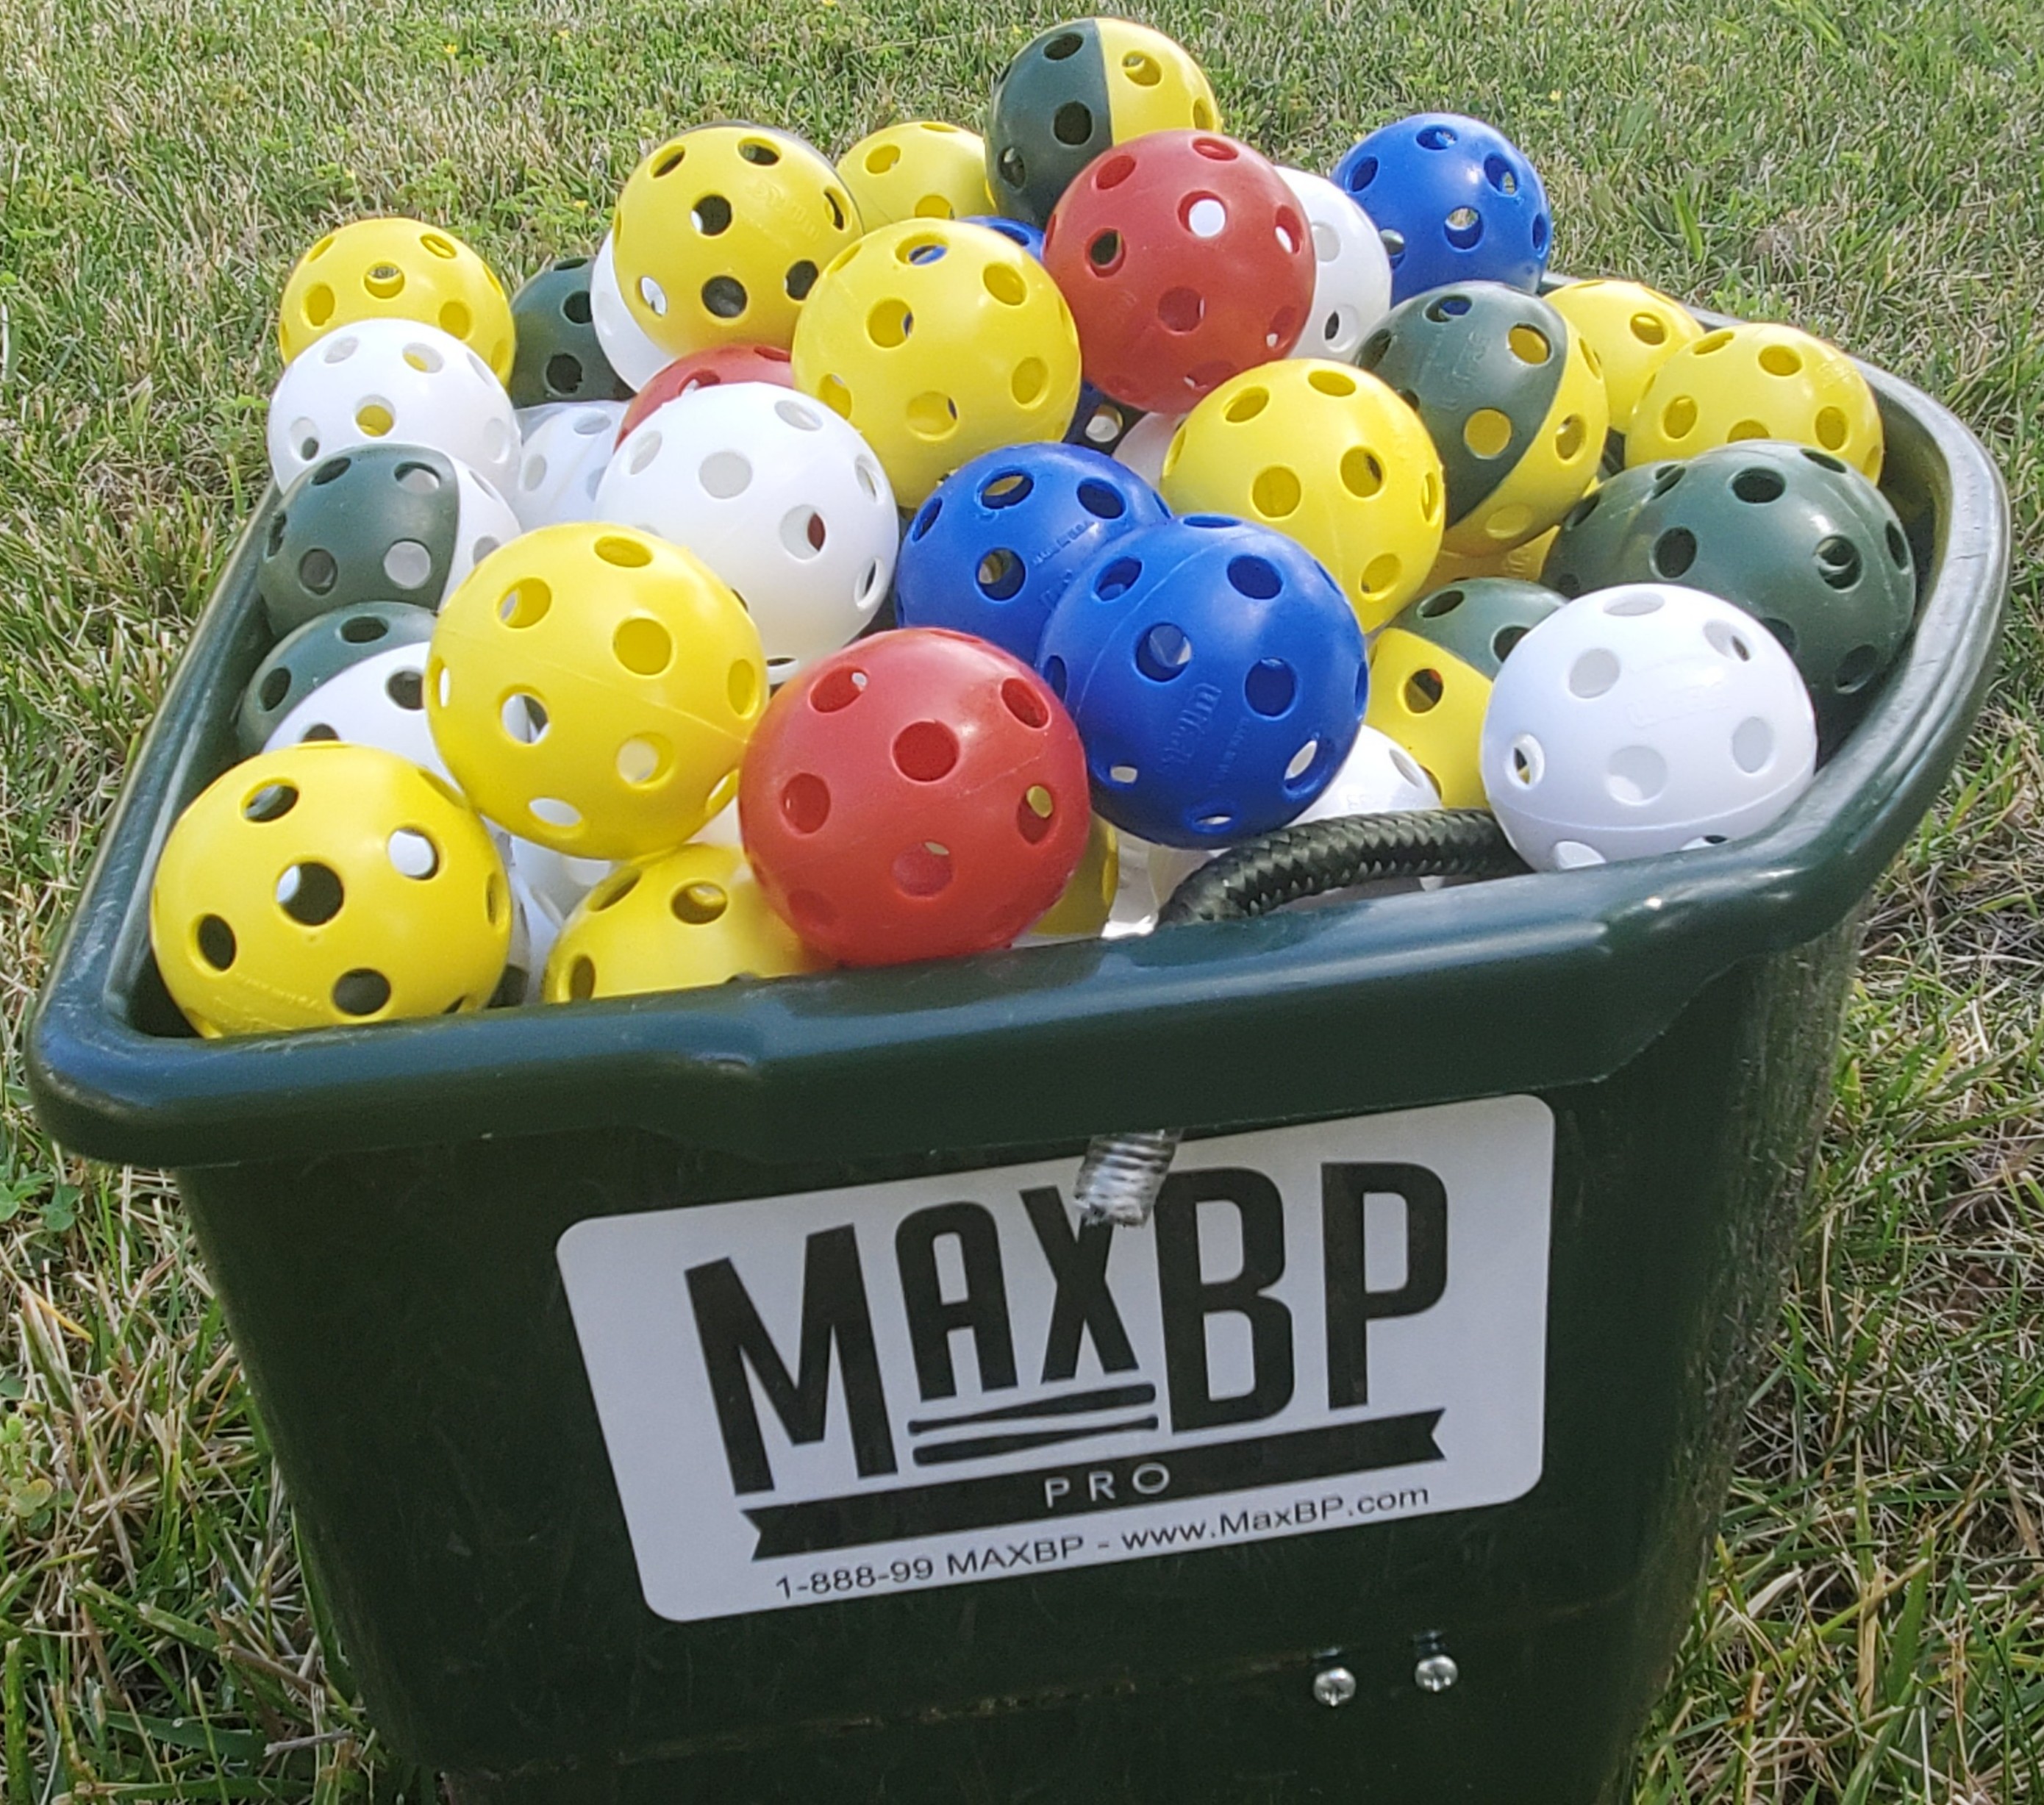 MaxBP allows players and their families the opportunity to save time and money, while providing their athlete with more reps than ever at the fraction of the price